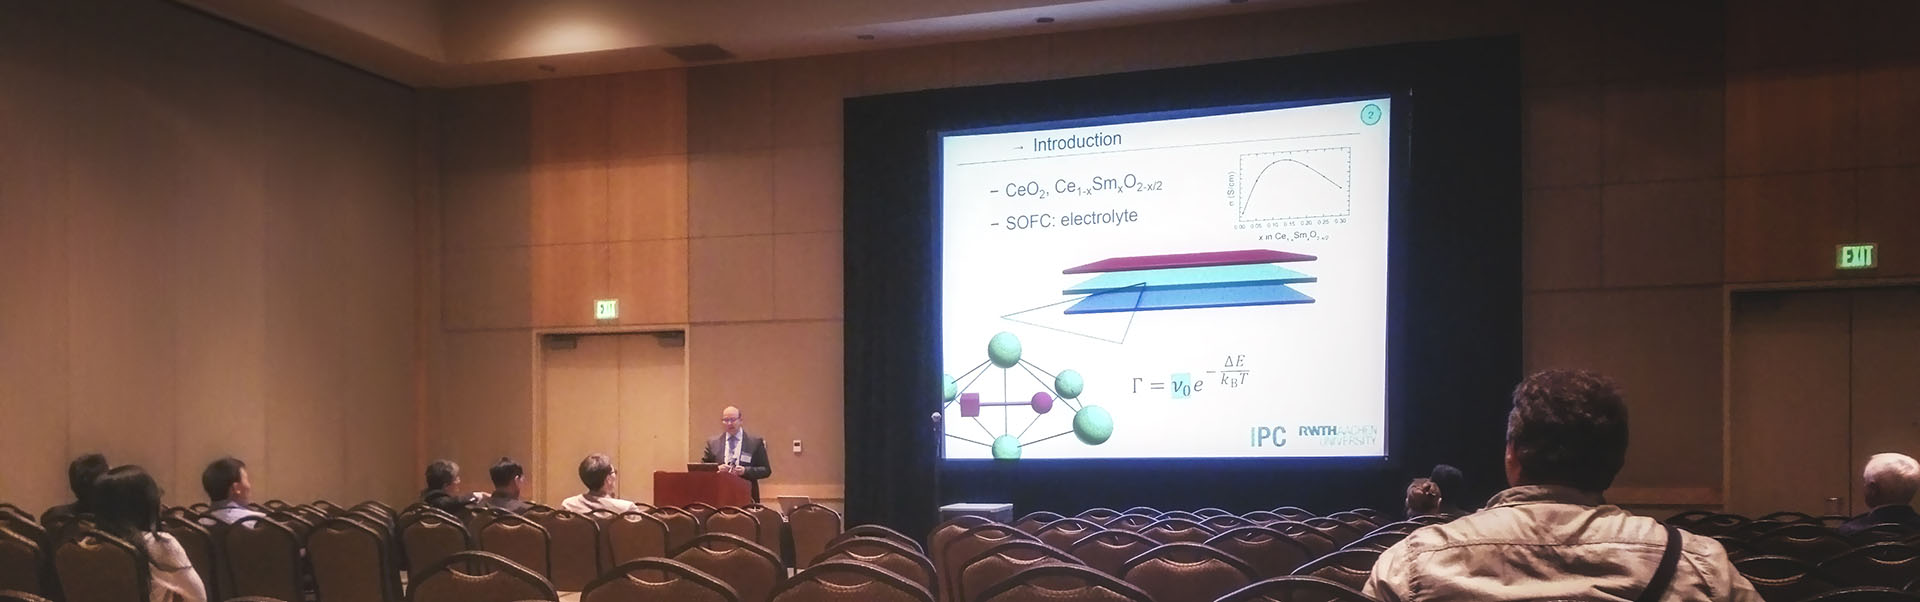 Julius Koettgen, A First-Principles Approach to the Attempt Frequency of Oxygen Ion Jumps in Doped Ceria, 20th International Conference on Solid State Ionics (SSI-20), Keystone, Colorado, USA